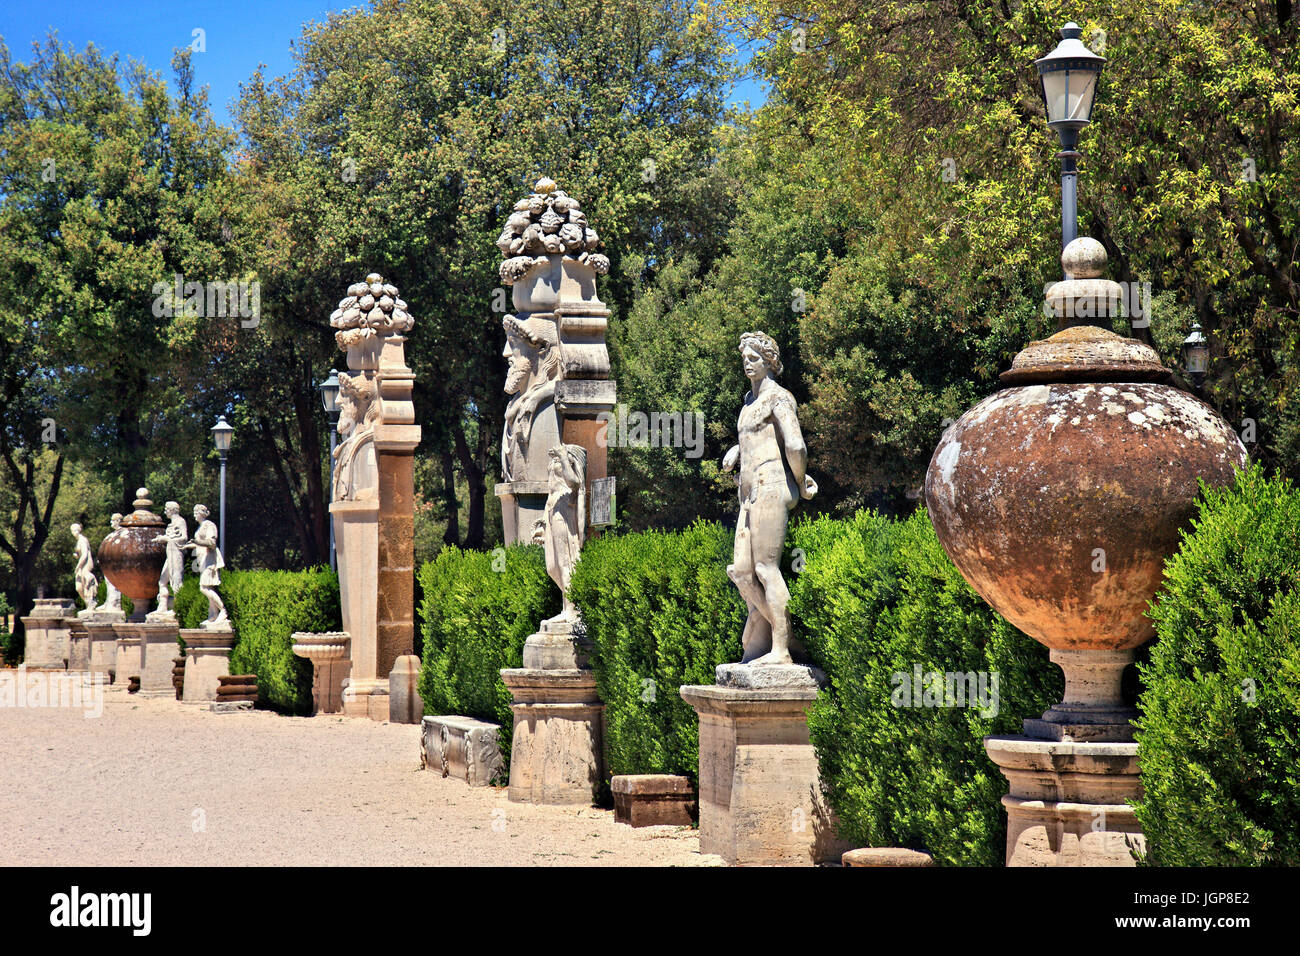 At the gardens of Galleria Borghese, Rome, Italy. Stock Photo